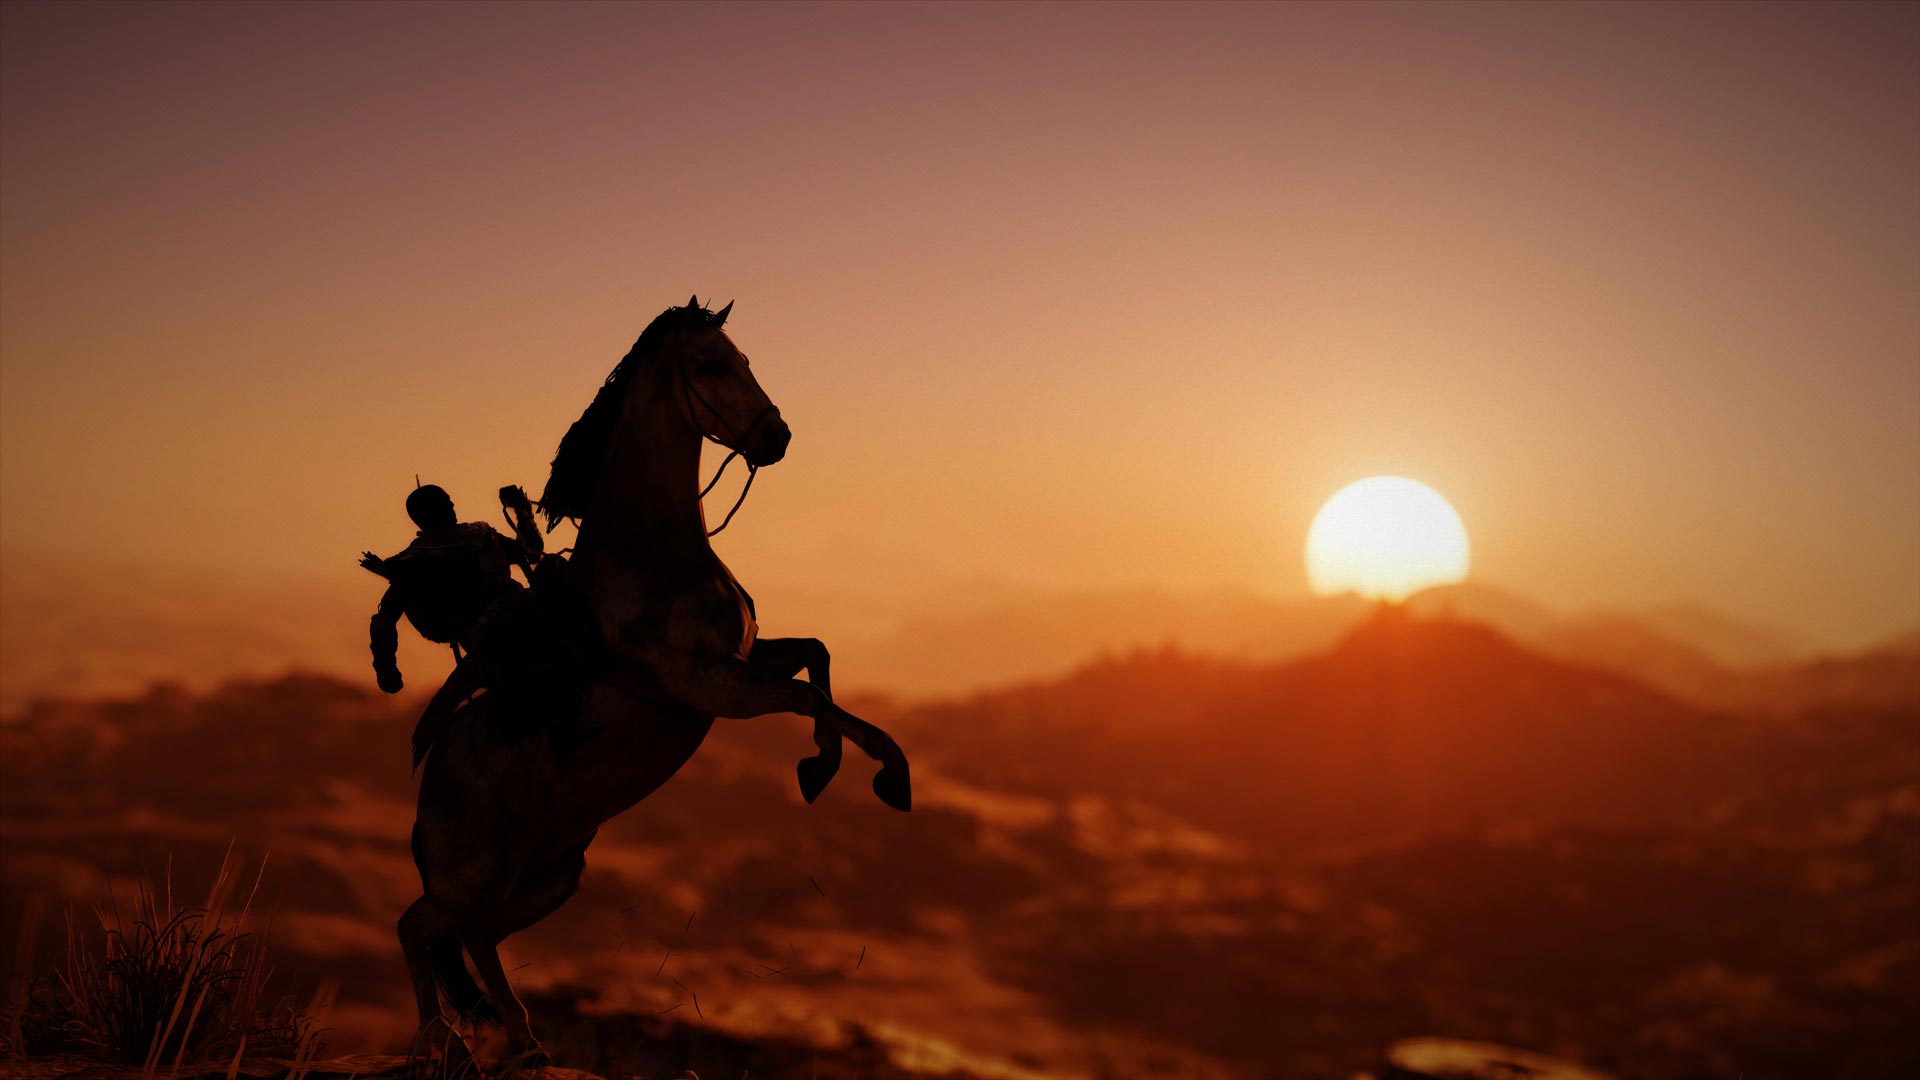 Image for A Final Fantasy 15 mission is now available in Assassin's Creed Origins, and includes a very special new mount